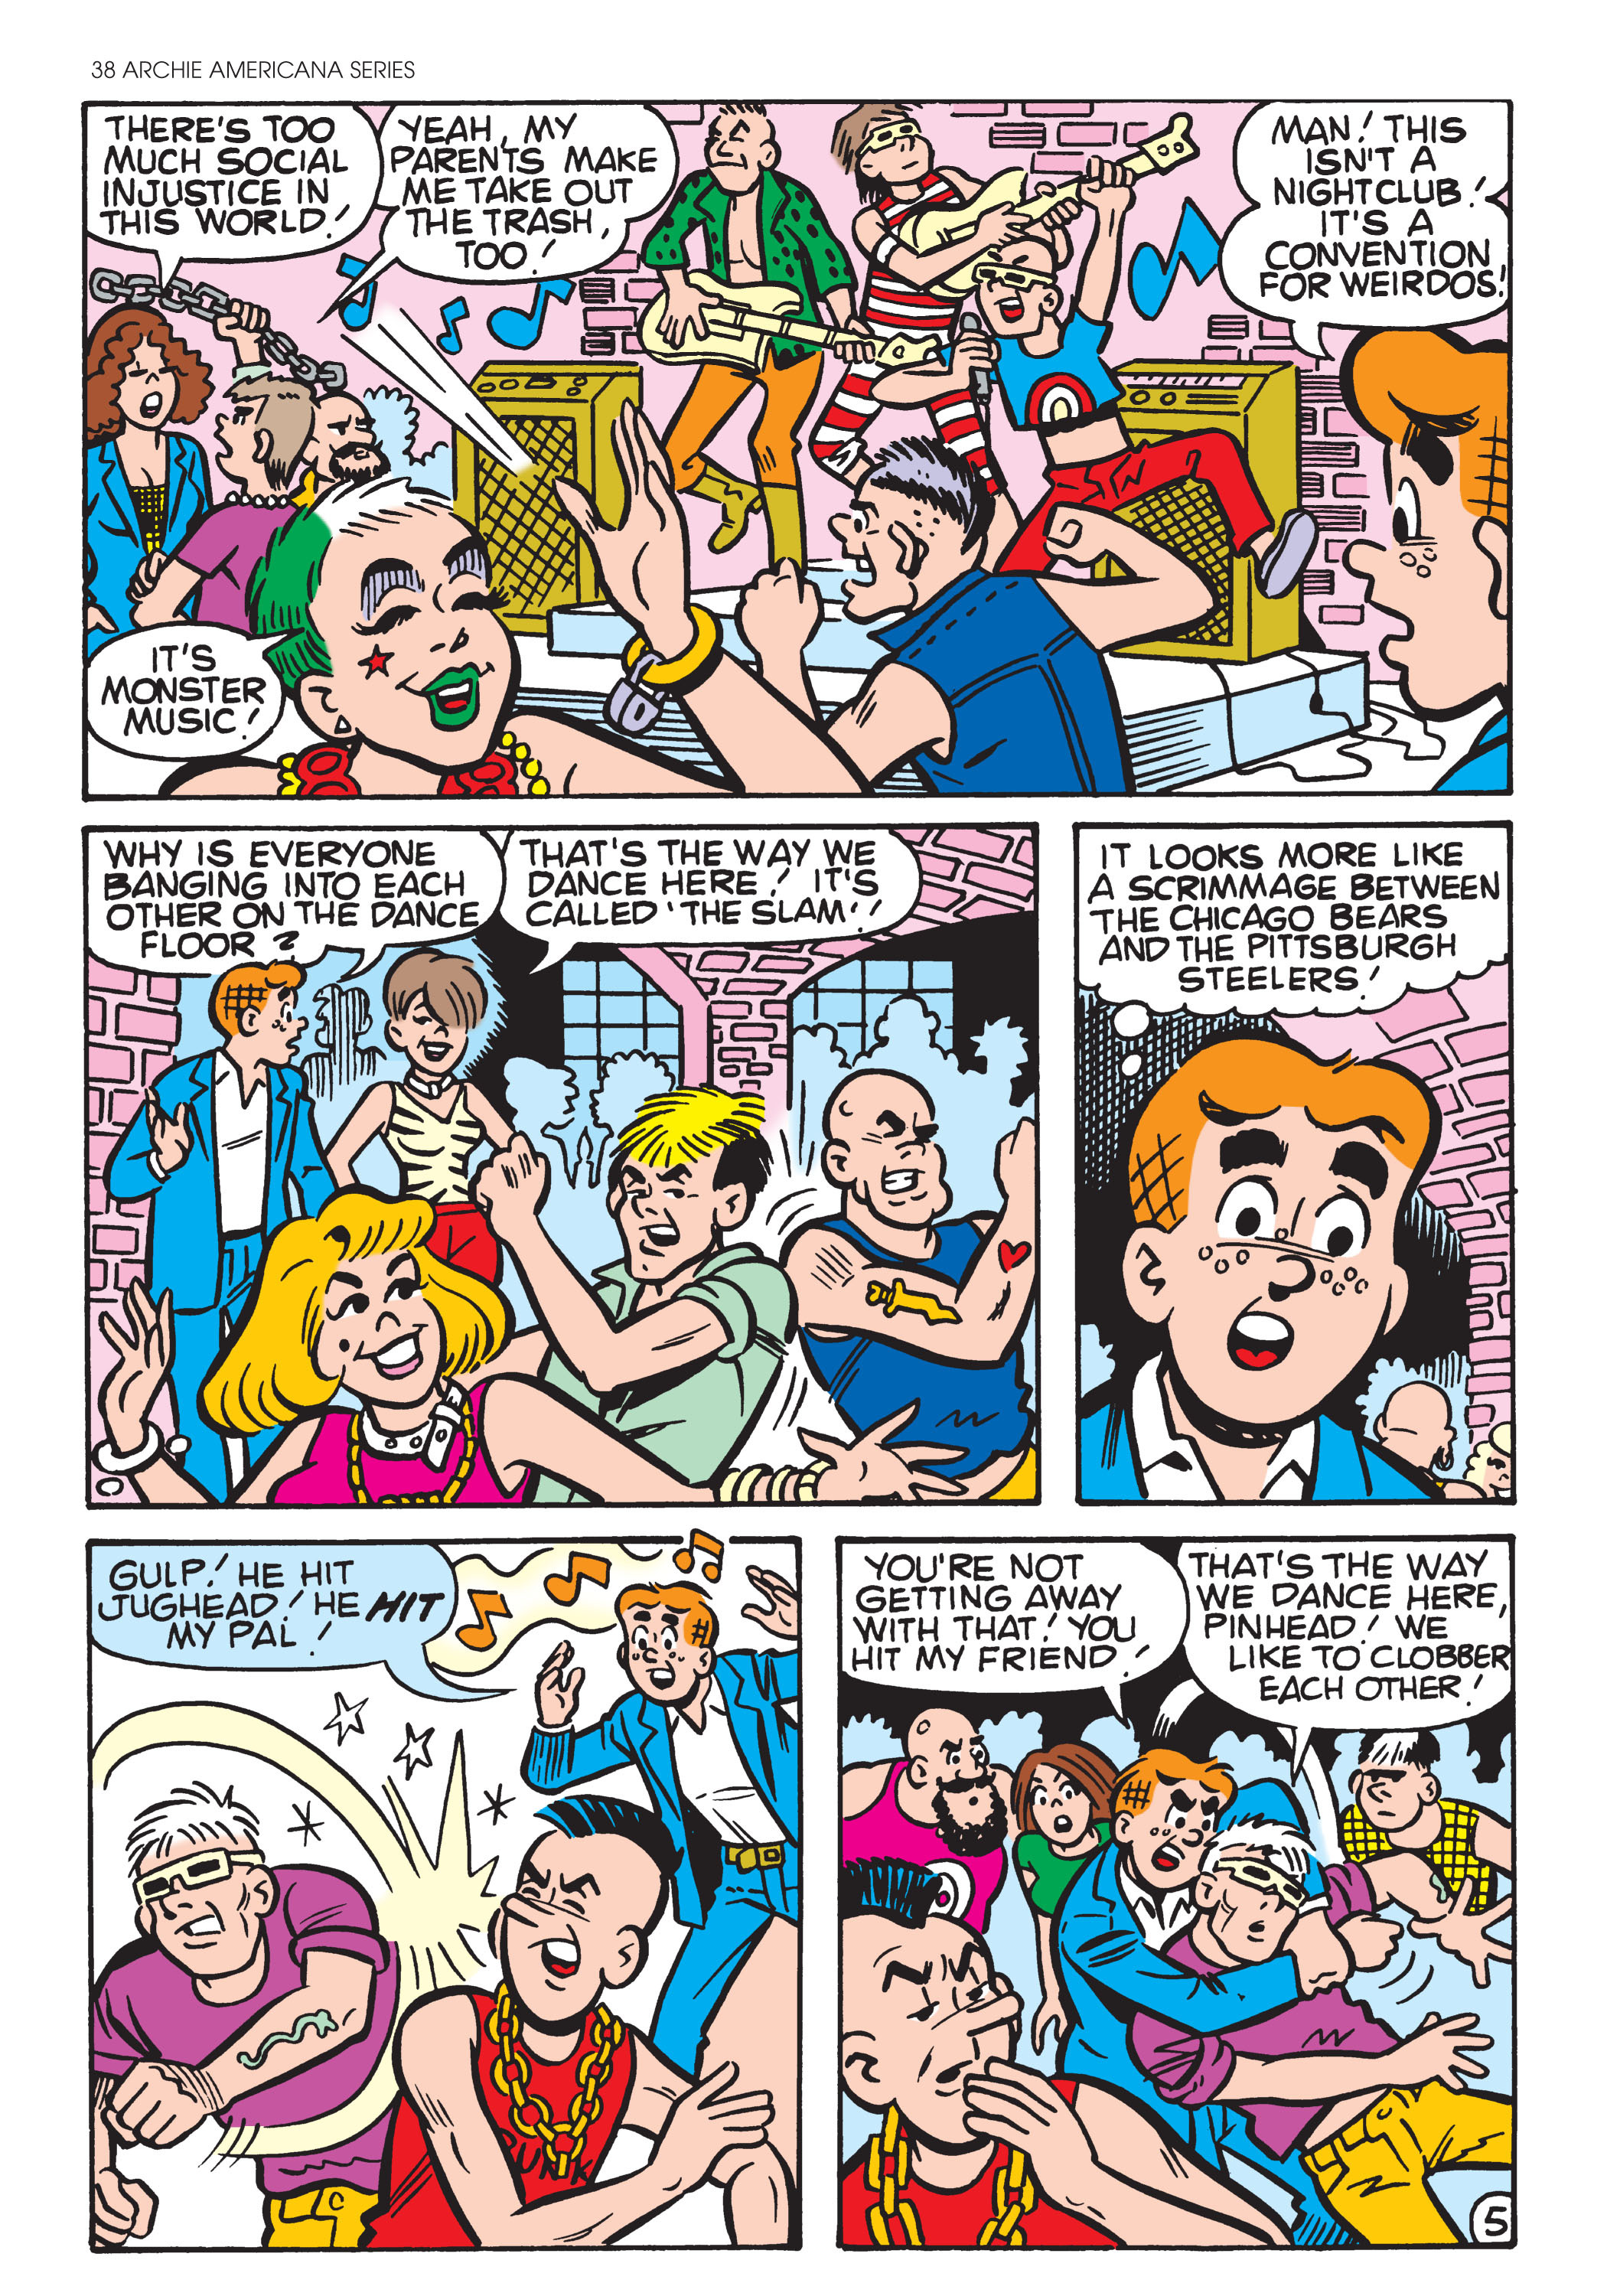 Read online Archie Americana Series comic -  Issue # TPB 5 - 40